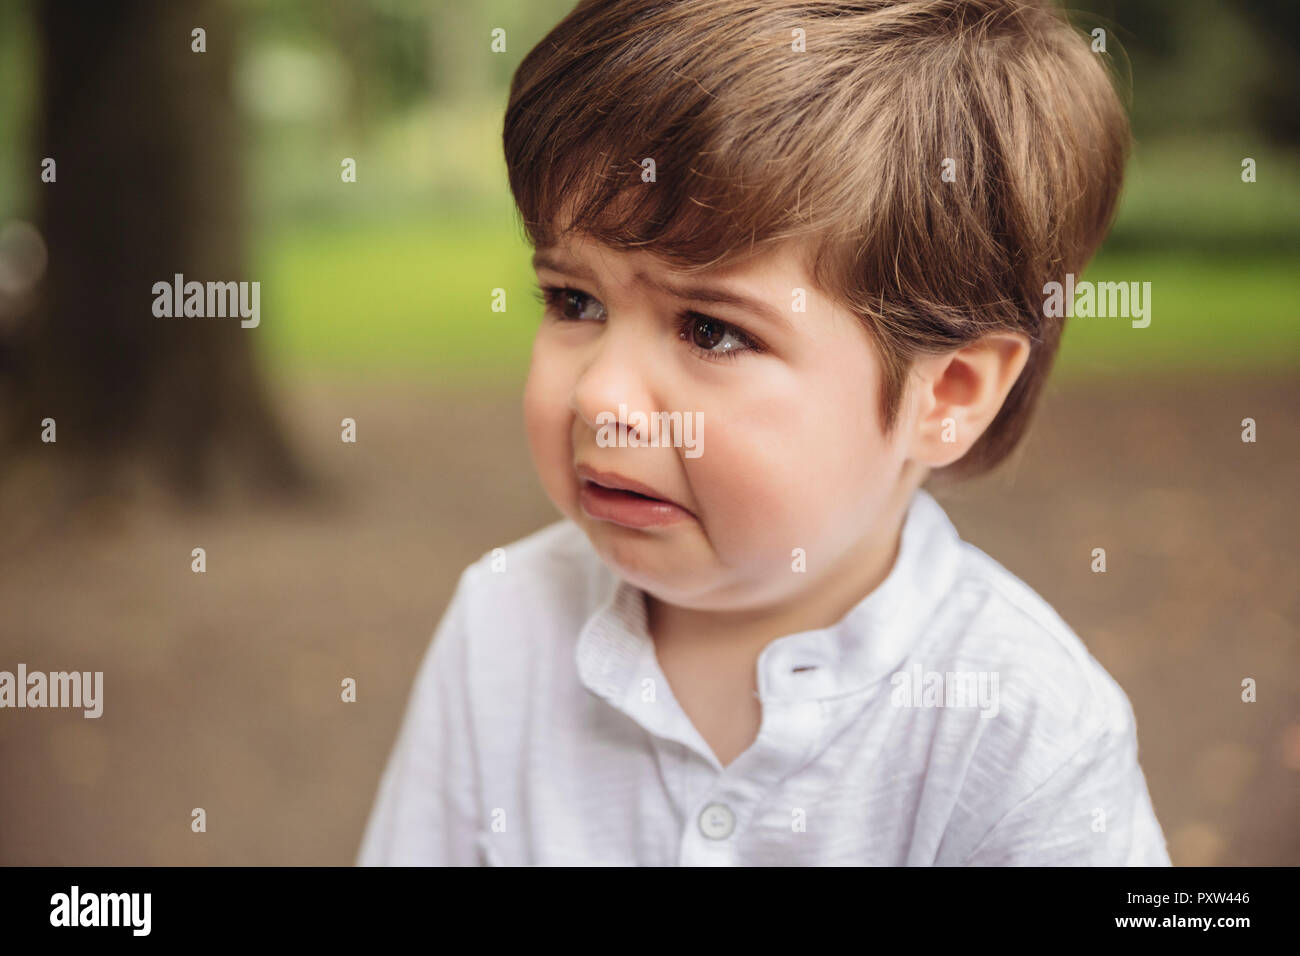 Portrait of crying toddler Stock Photo